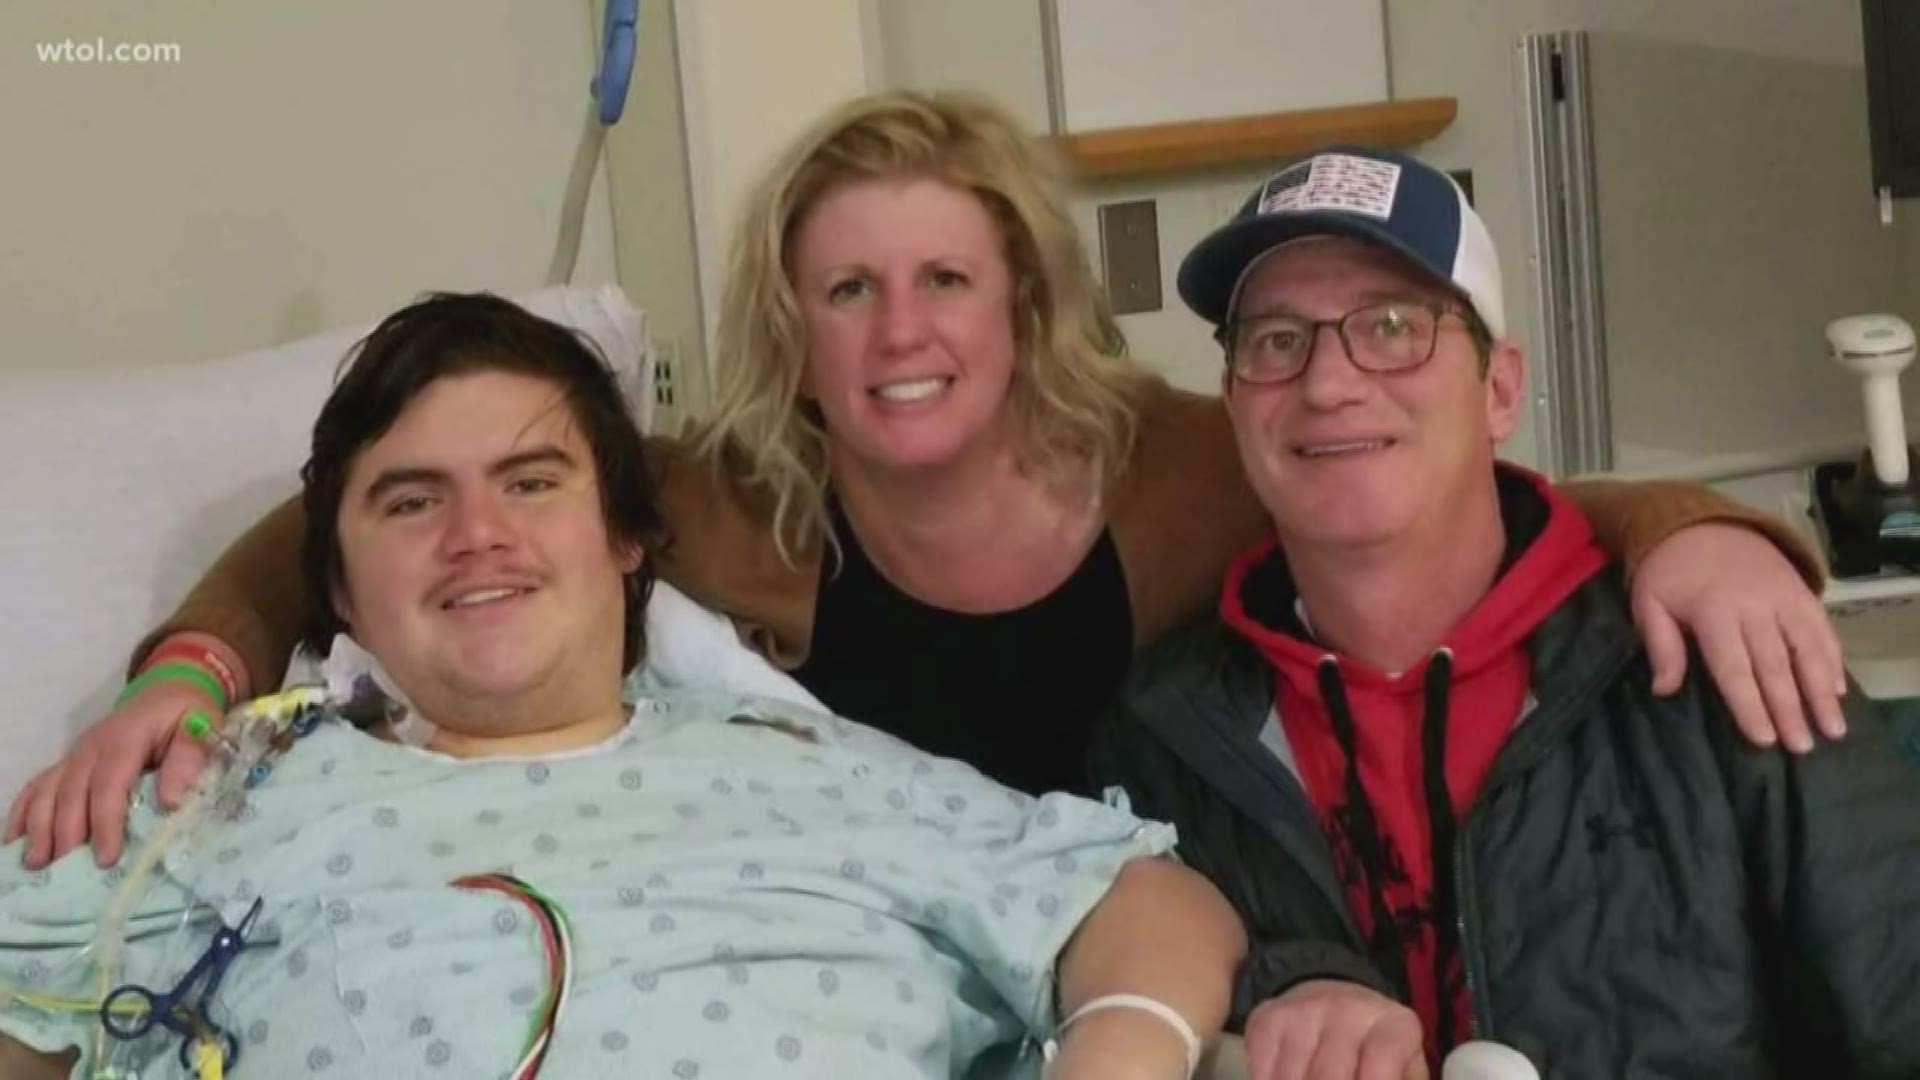 After surviving three heart attacks, multiple major surgeries and a stroke, Gabe Villanueva has already been on the transplant list for nearly 2 years.